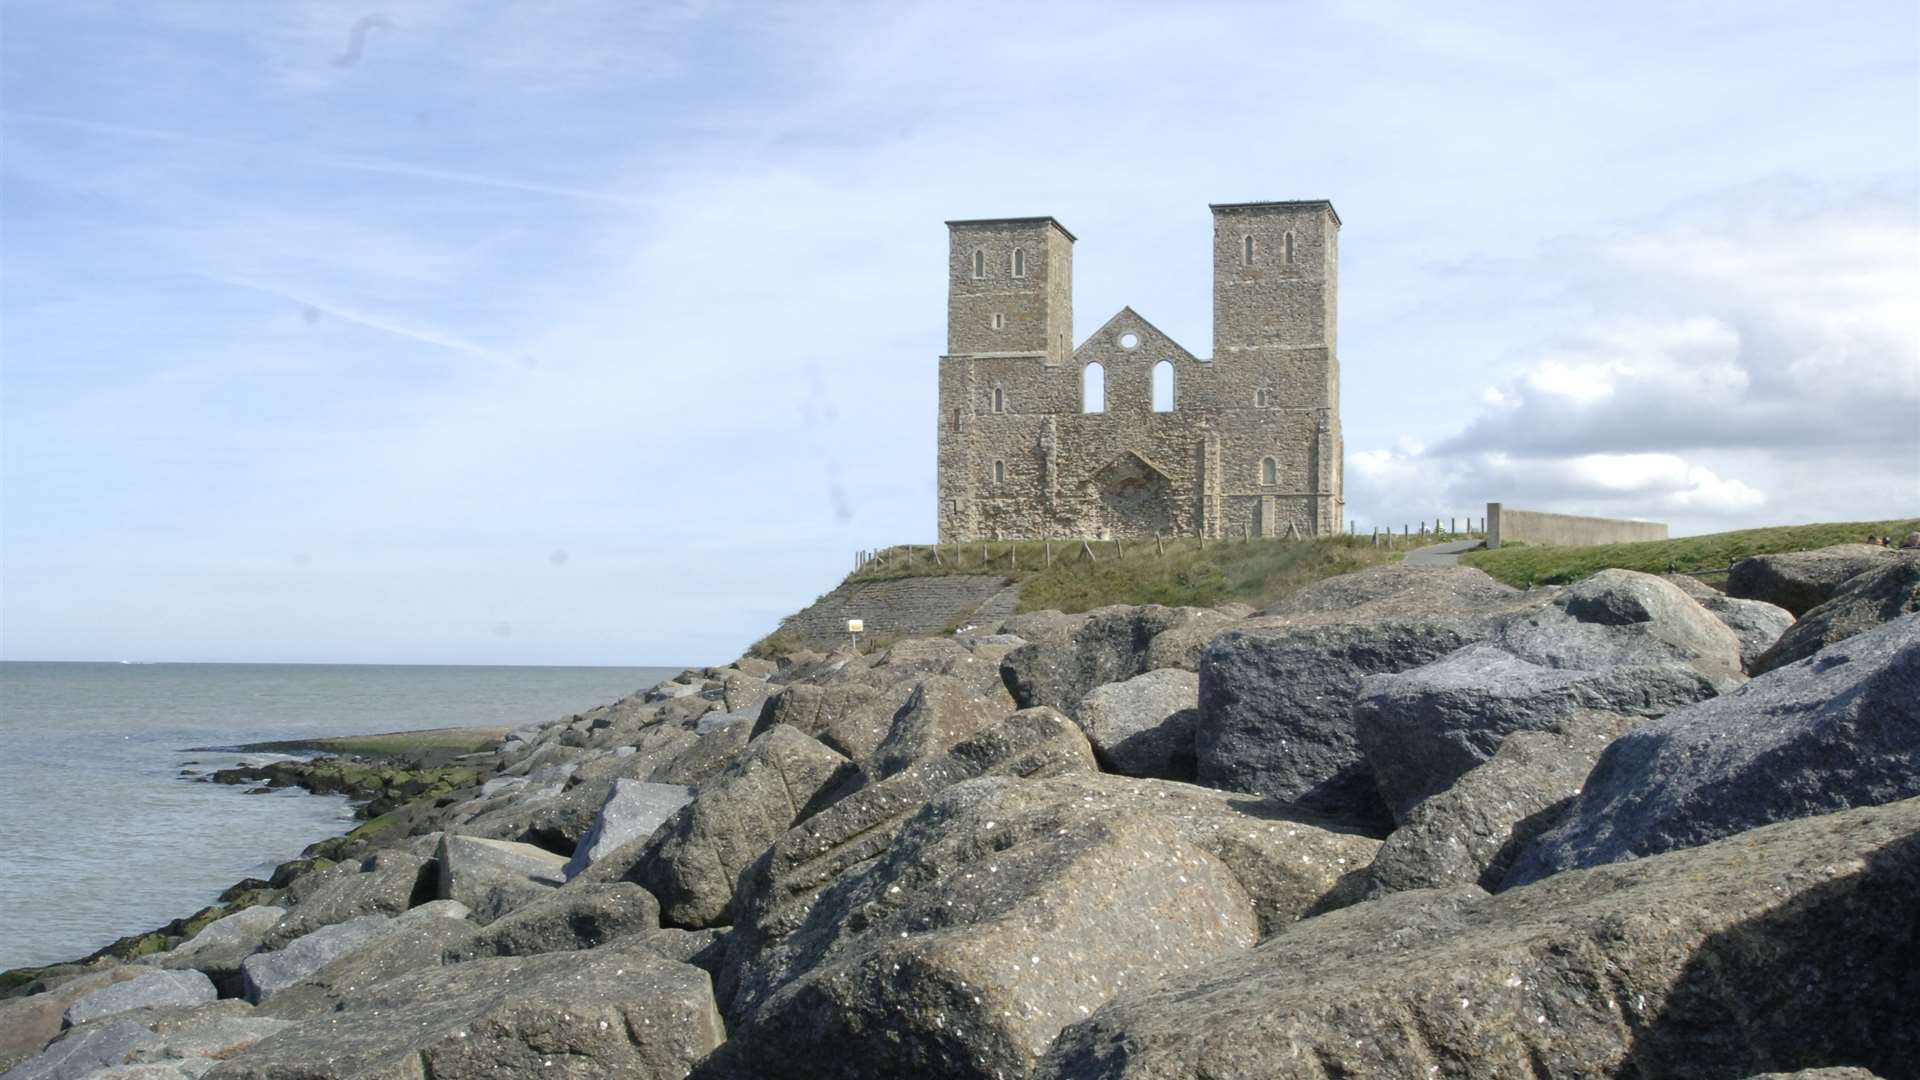 The dominating Reculver Towers